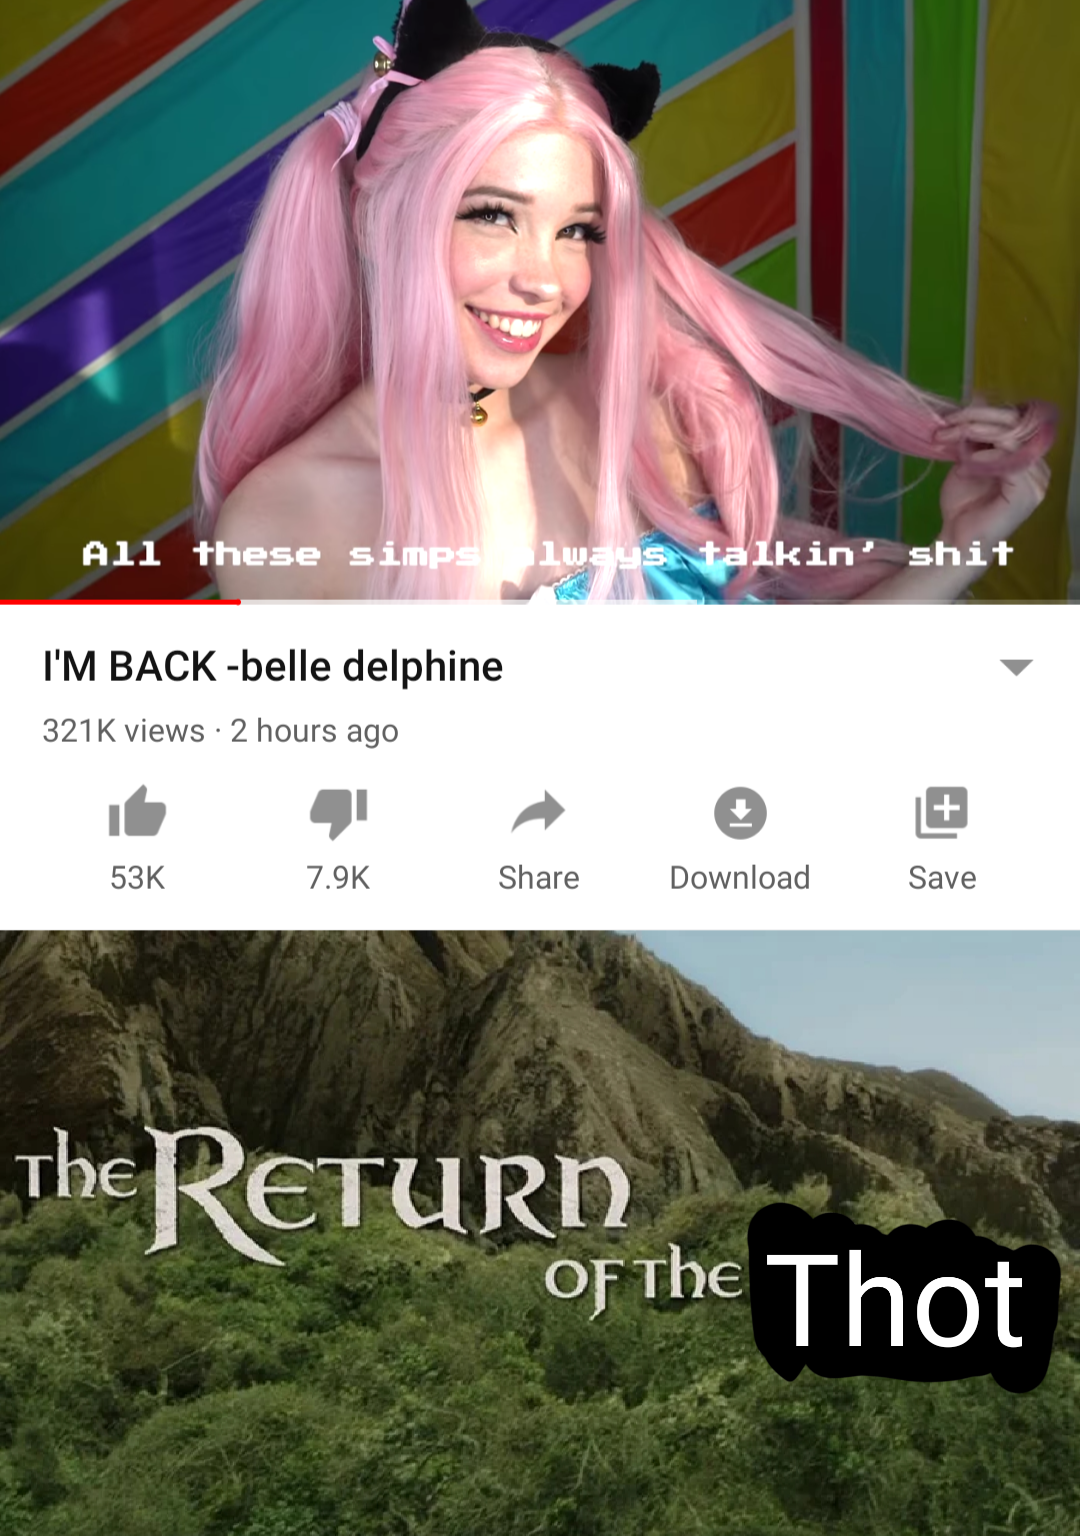 The Fellowship of the thot